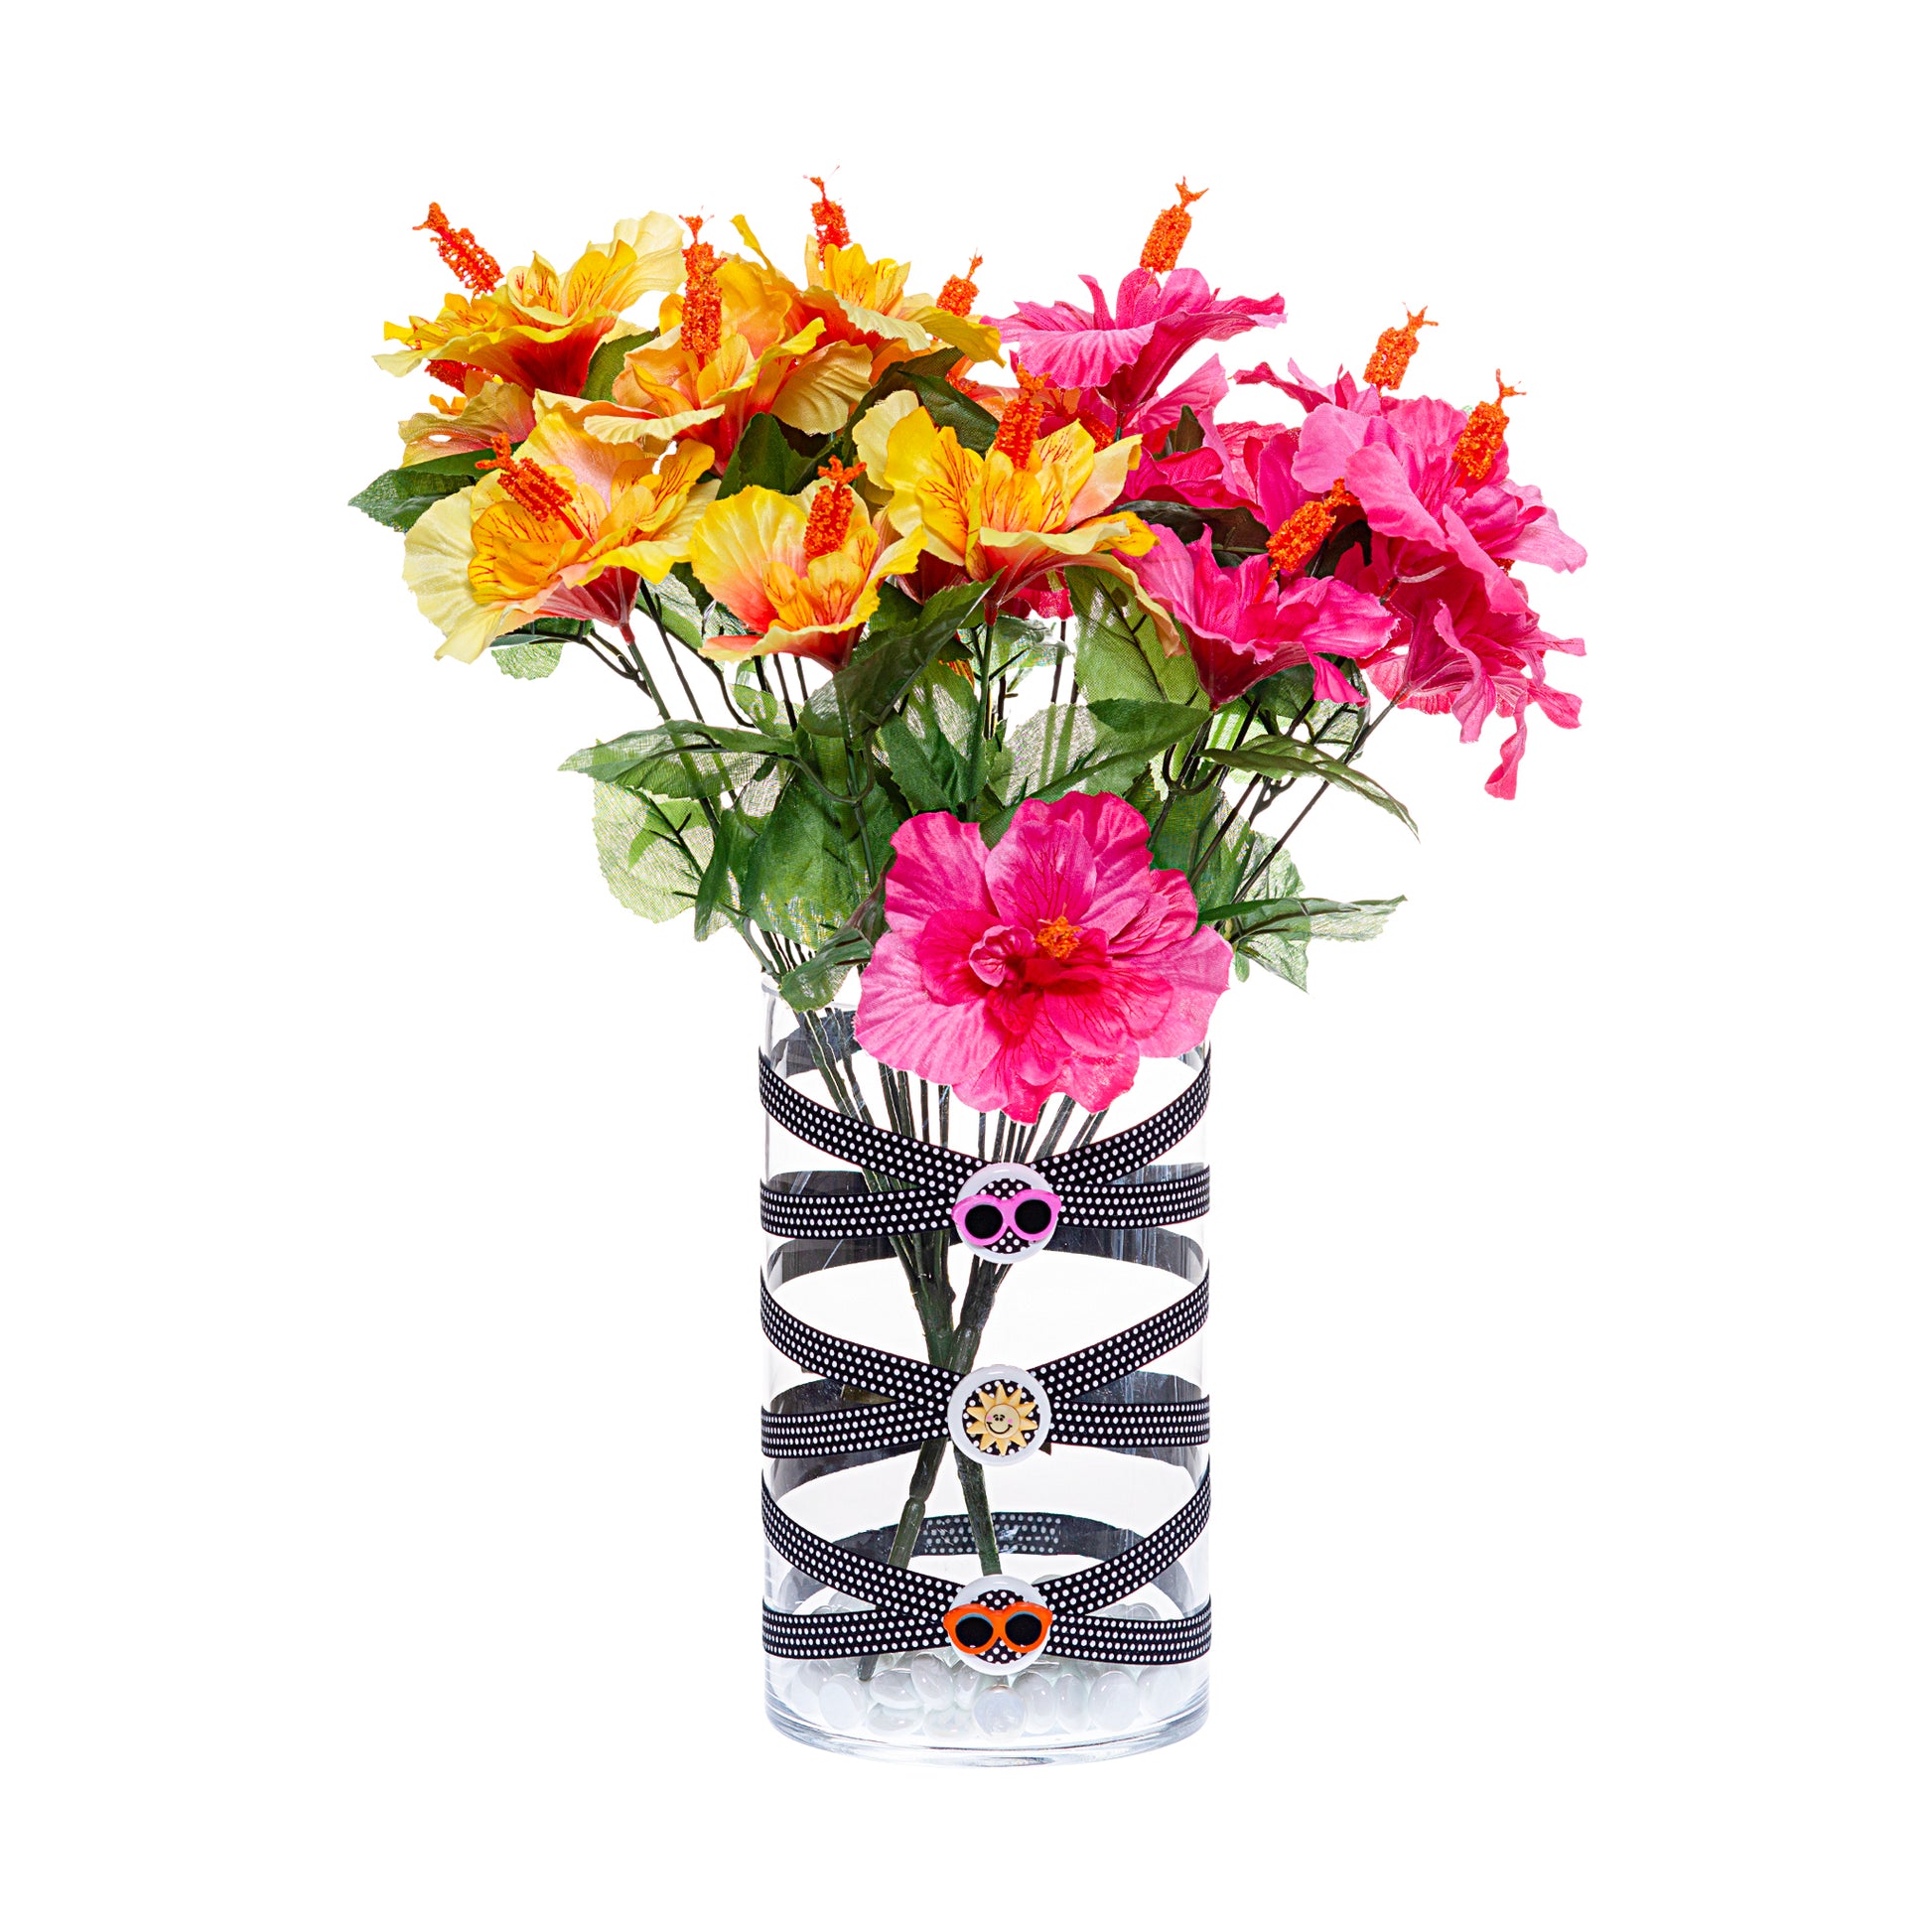 Front of Glass Wrappings 6" x 10" cylinder wrapped with black and white polka dot elastic, decorated with five pairs of colorful sunglasses and a smiley sun. It is filled with tropical flowers.